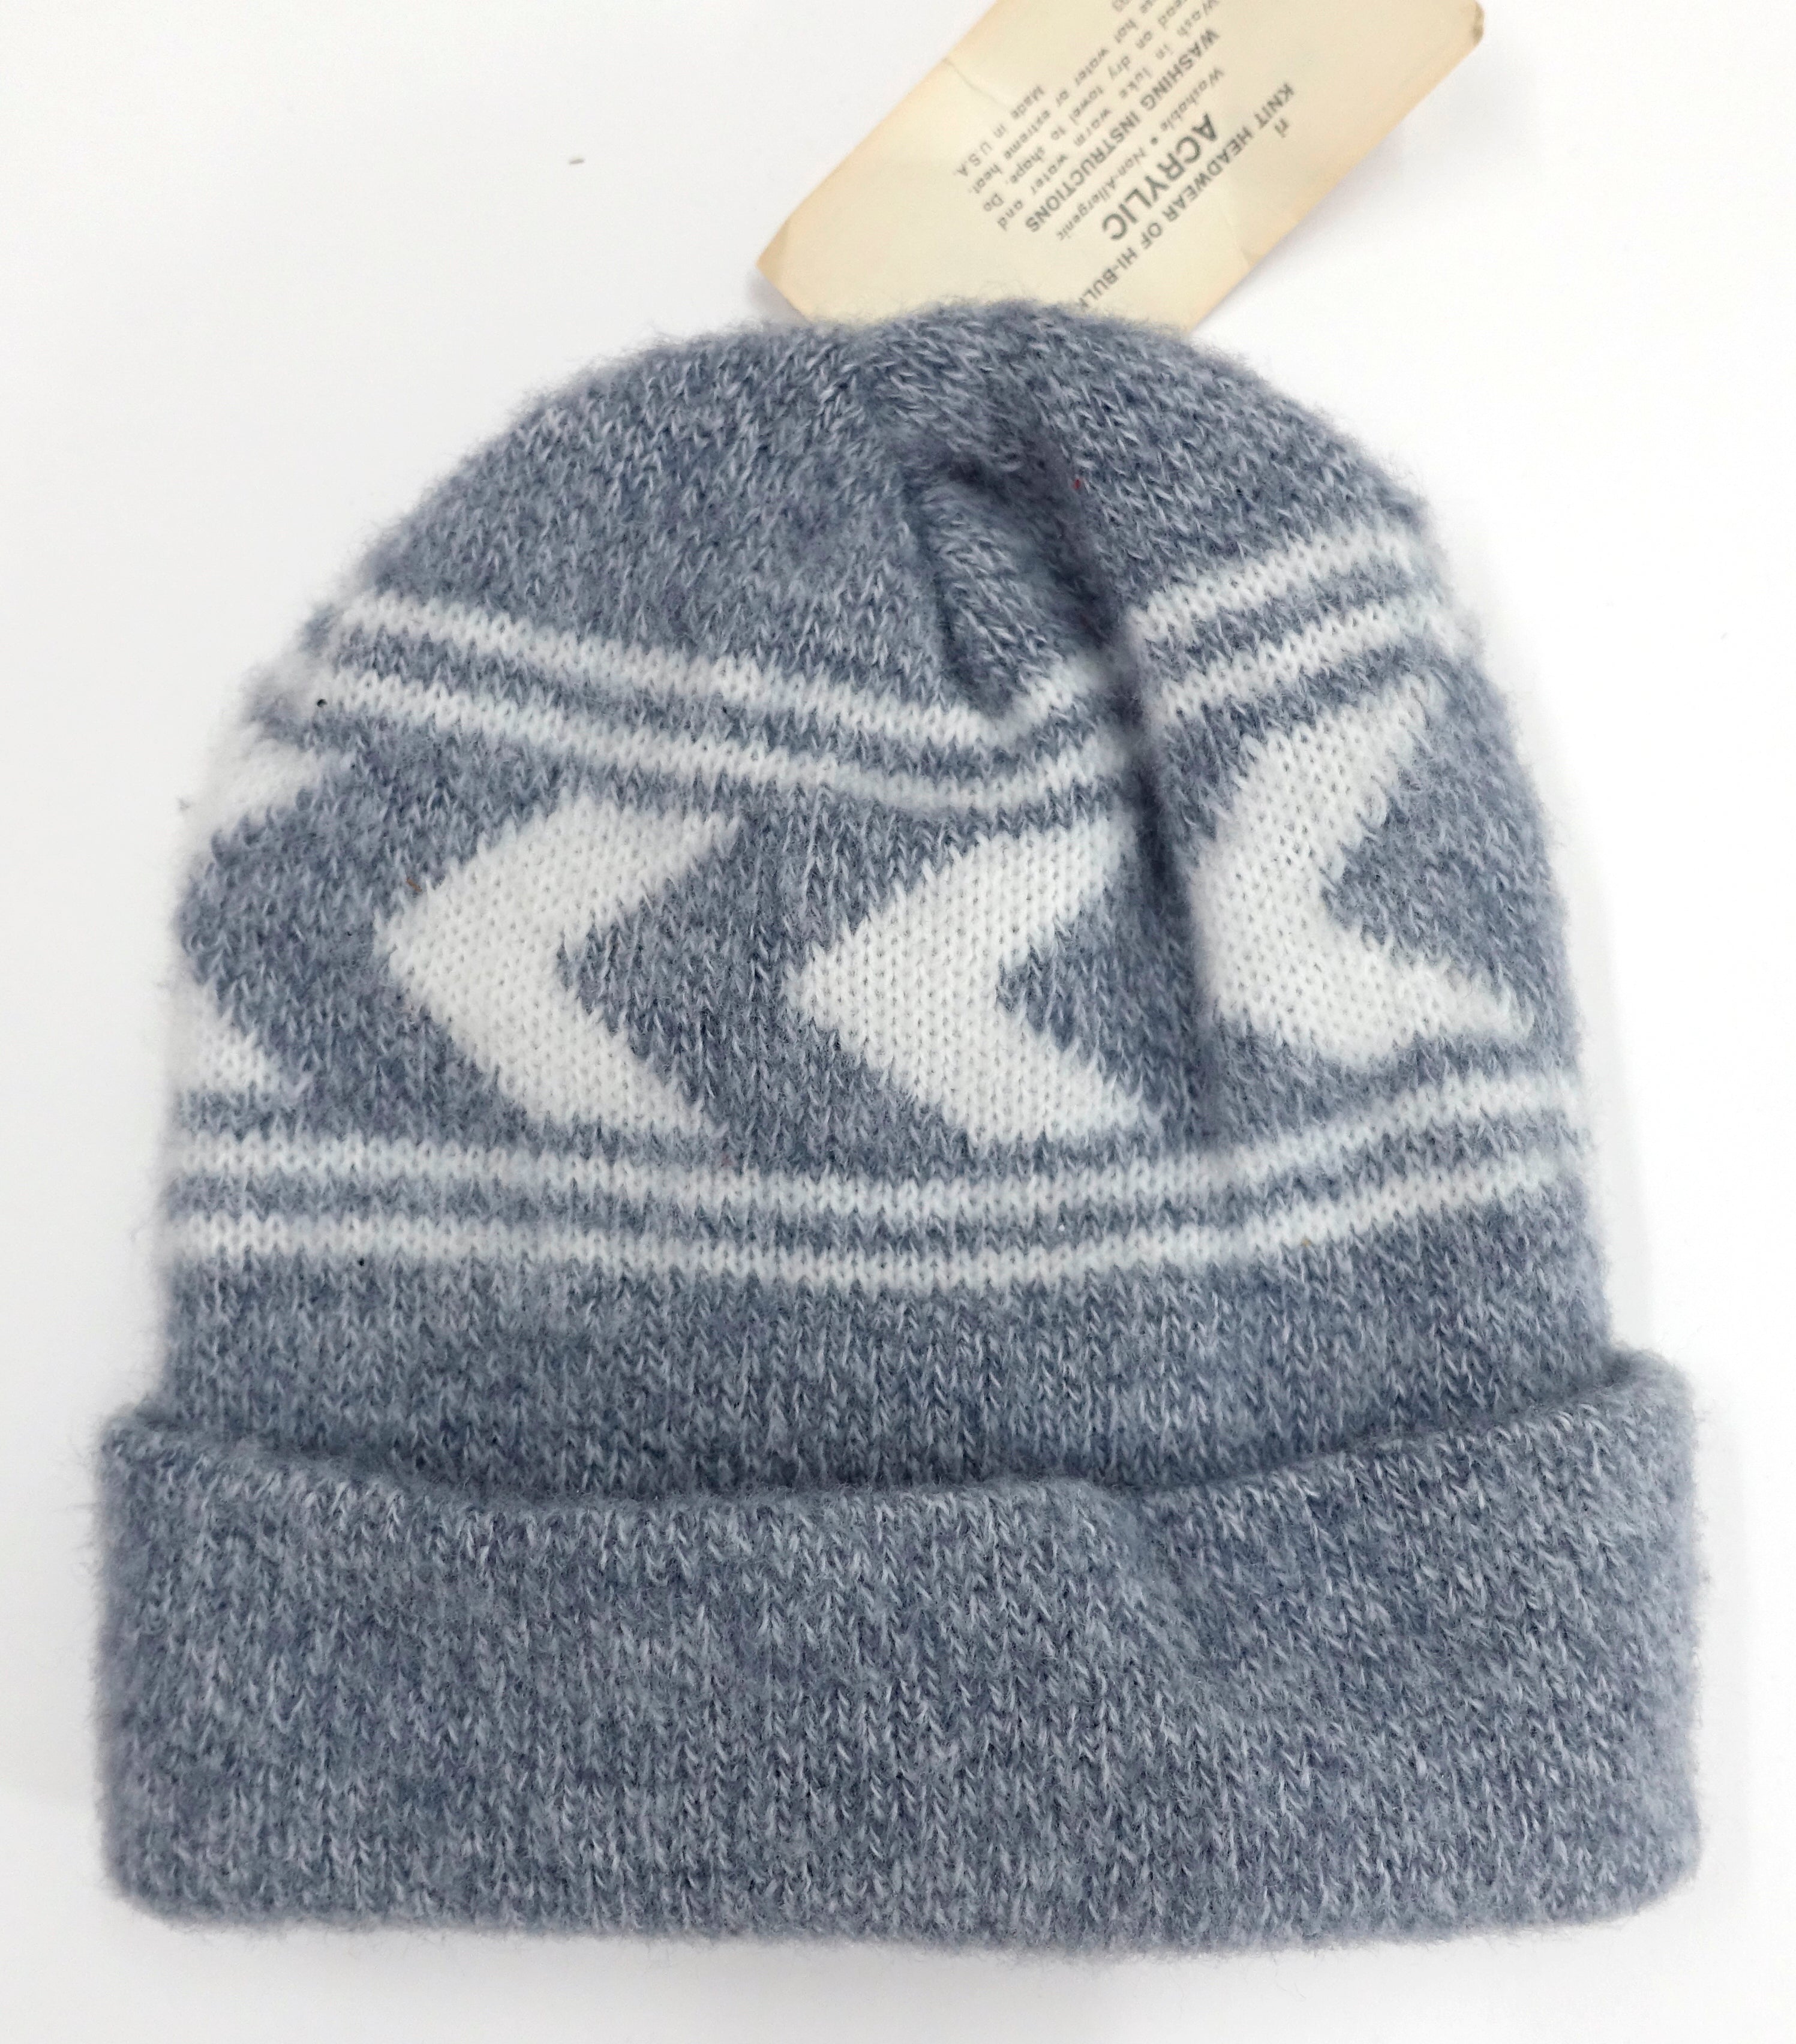 Chemical People - Grey Knit Beanie